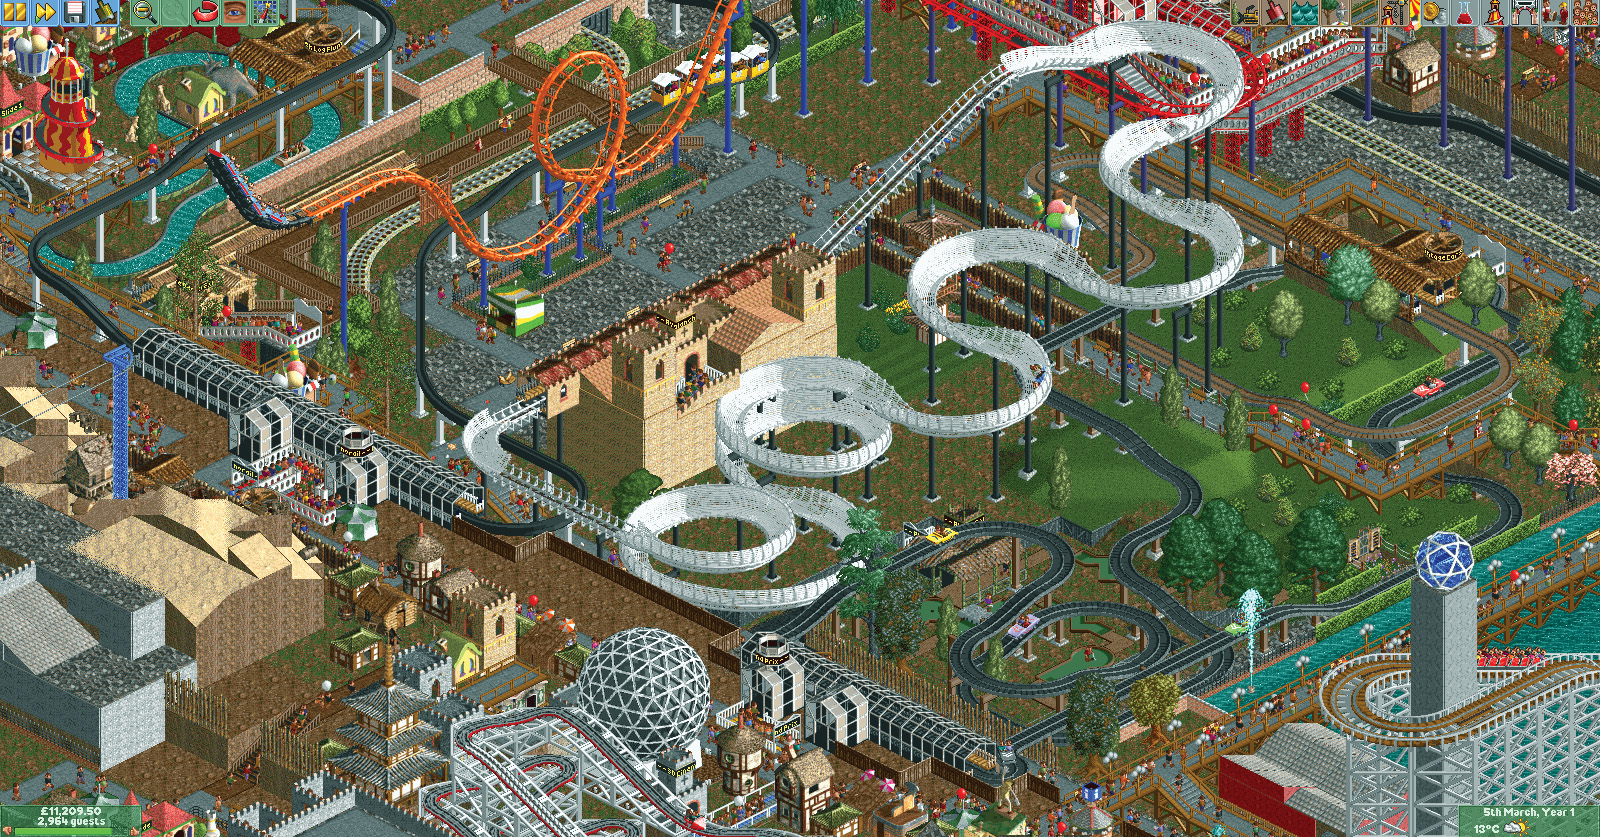 Returning To Rollercoaster Tycoon 2 With New Tools Pc Gamer,Bedroom Small Condo Interior Design Philippines